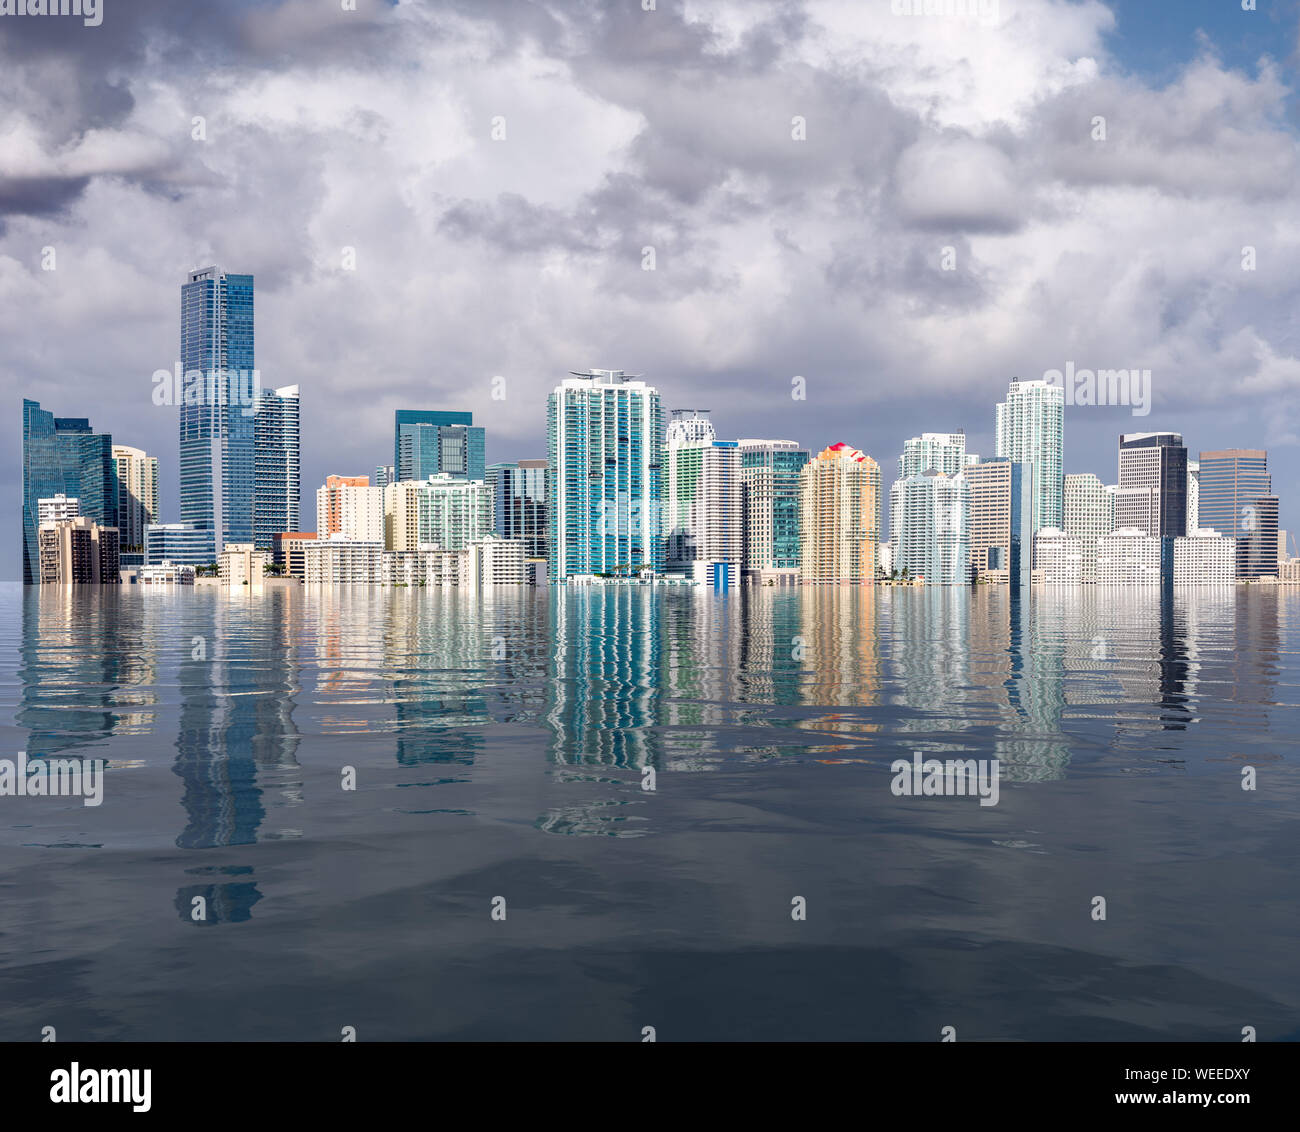 Miami skyline concept of sea level rise and flooding from global warming Stock Photo